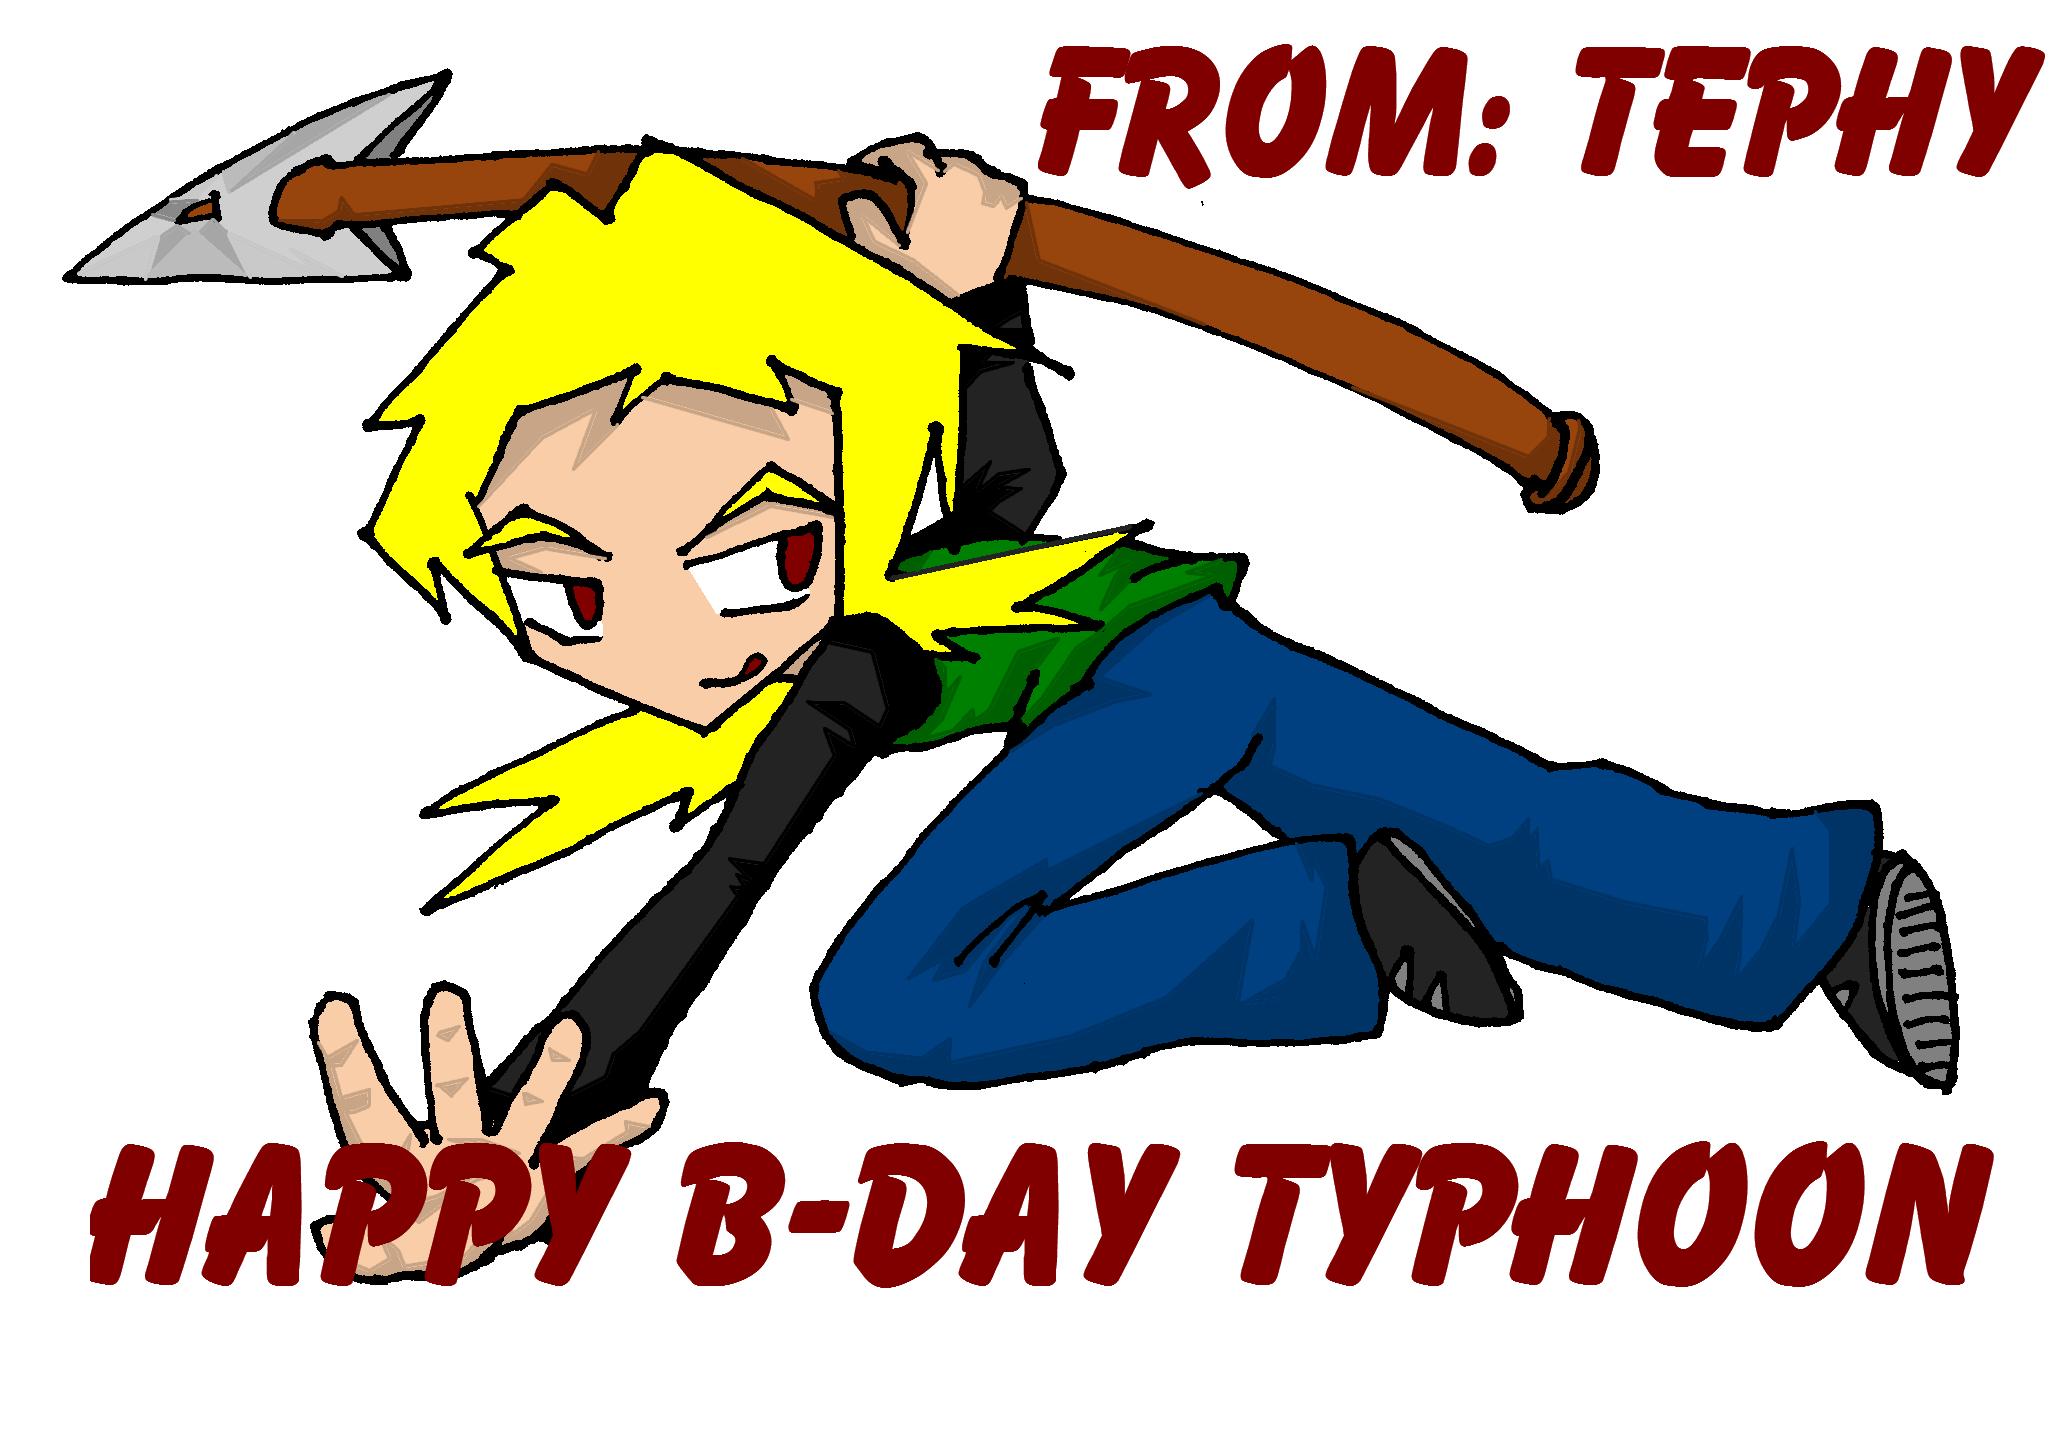 happy b-day typhoon! by Tephy113